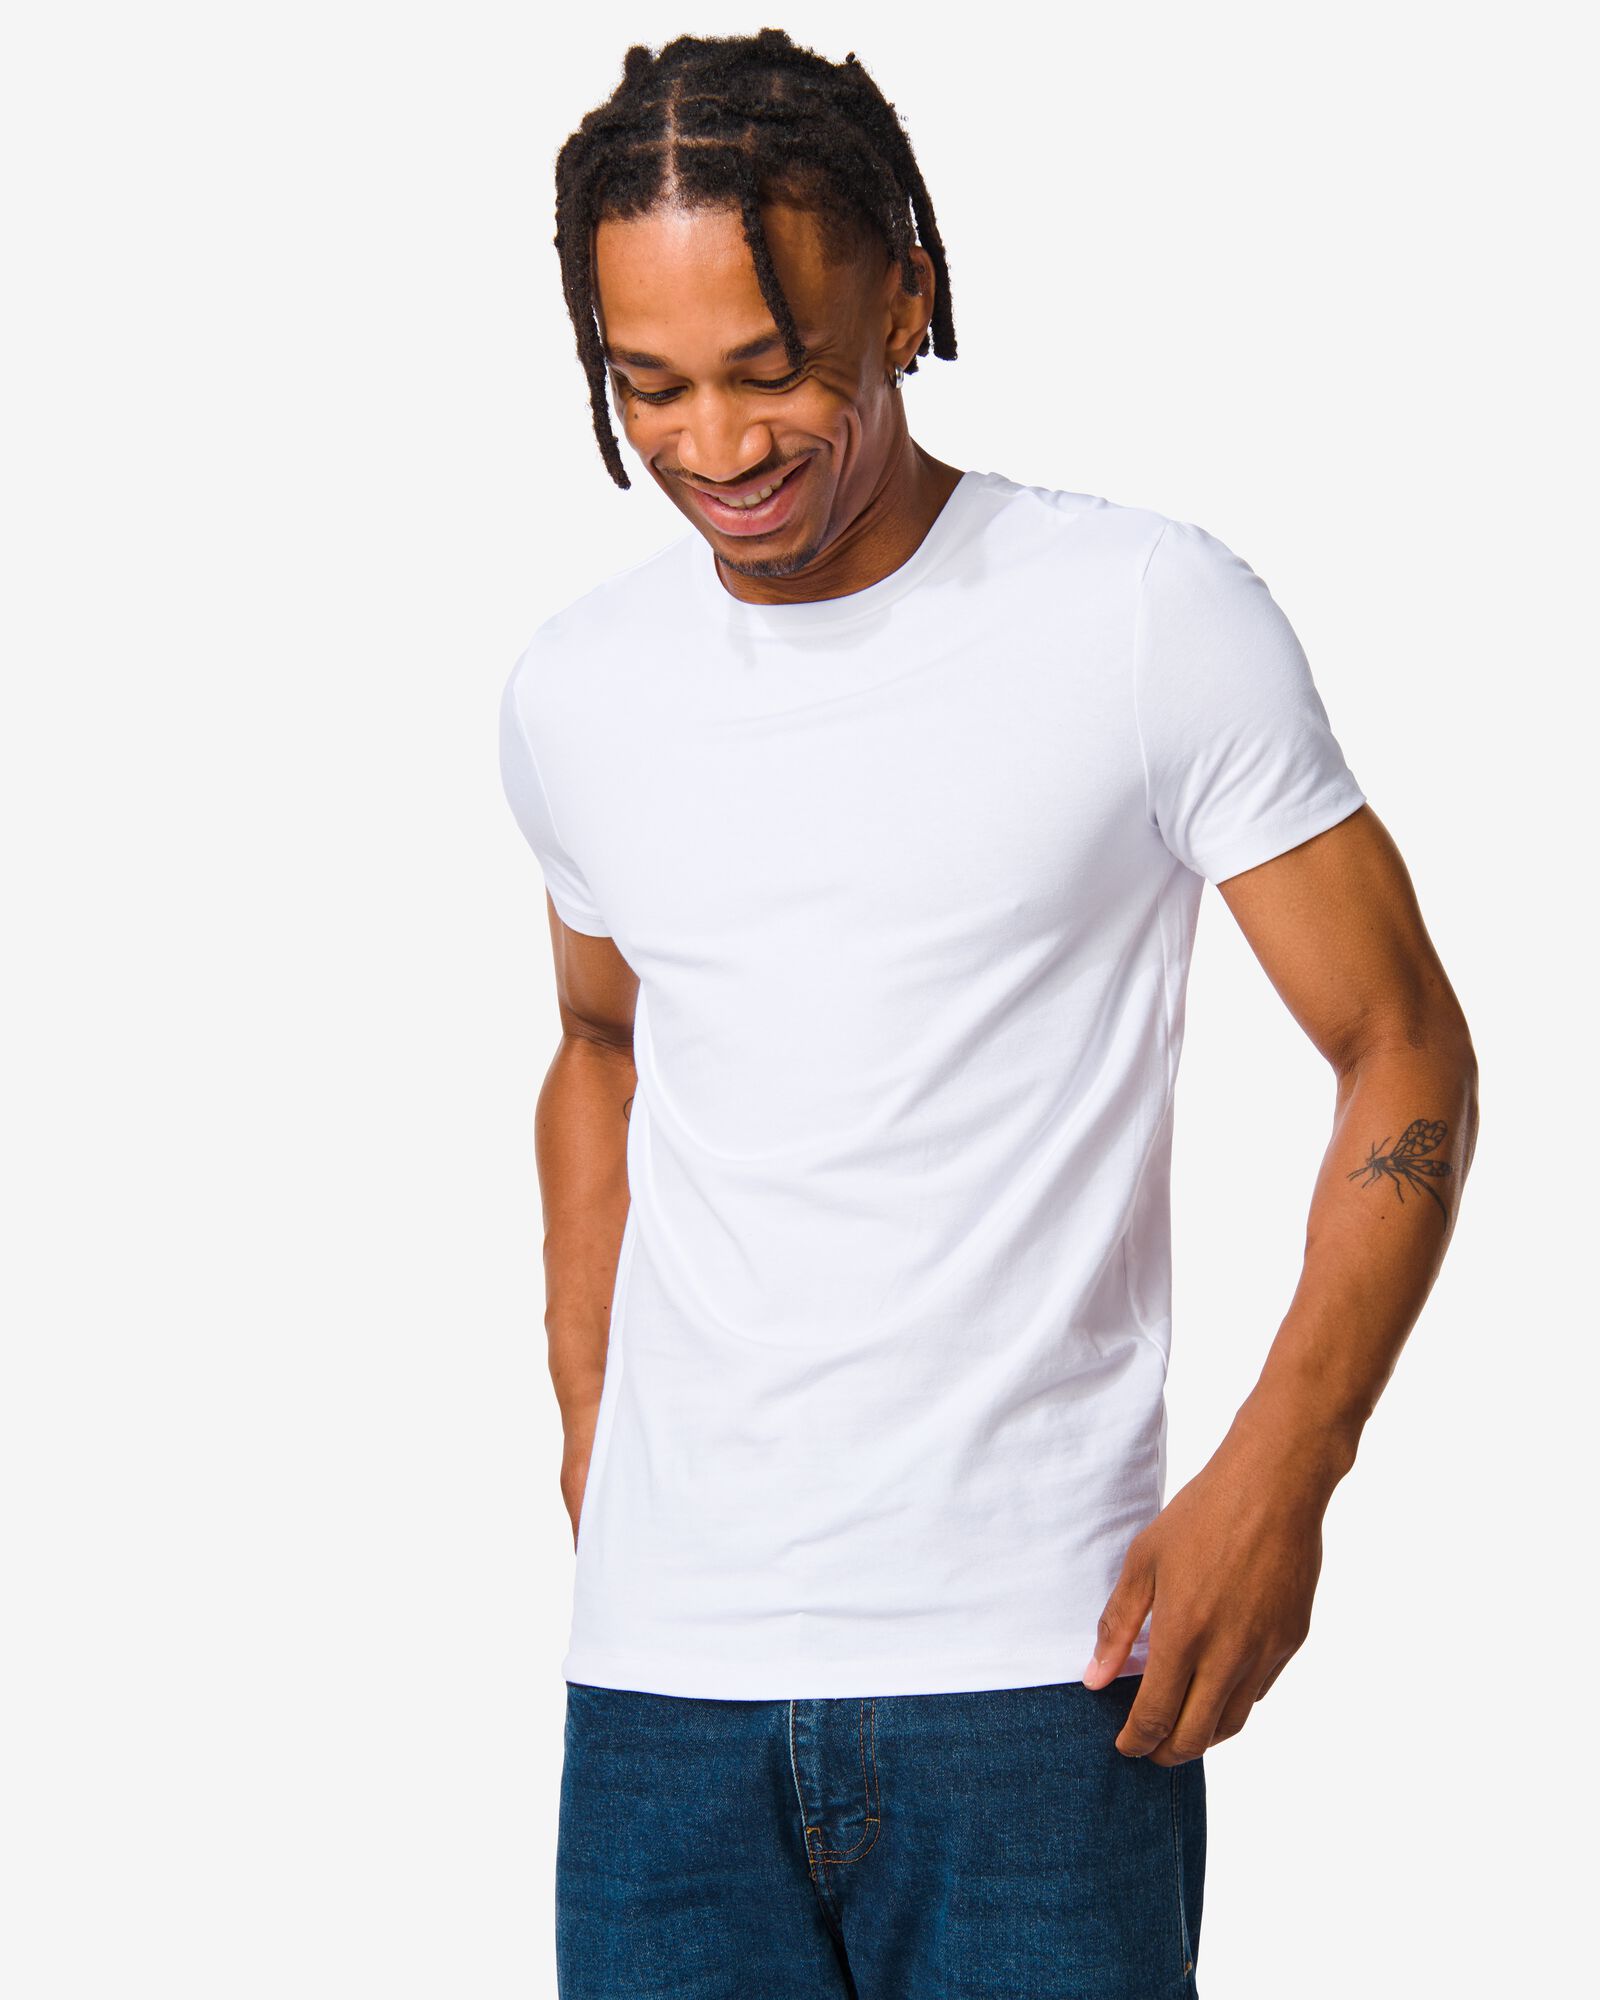 Tee-Shirt Homme ANNIVERSAIRE EXCELLENCE Taille M Couleur Blanc Age